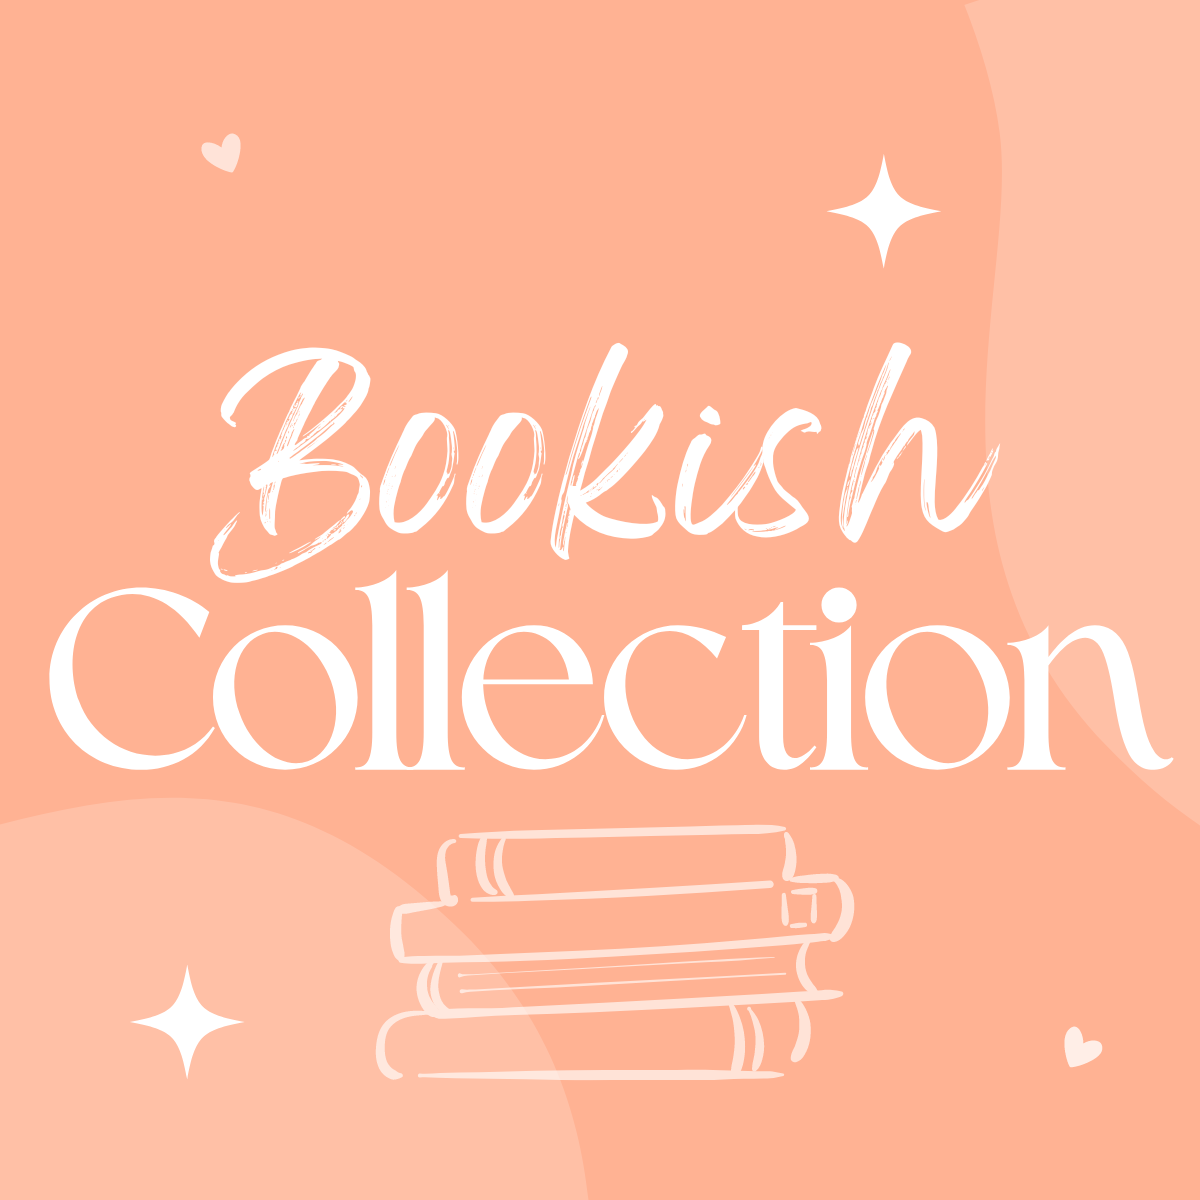 Bookish Collection